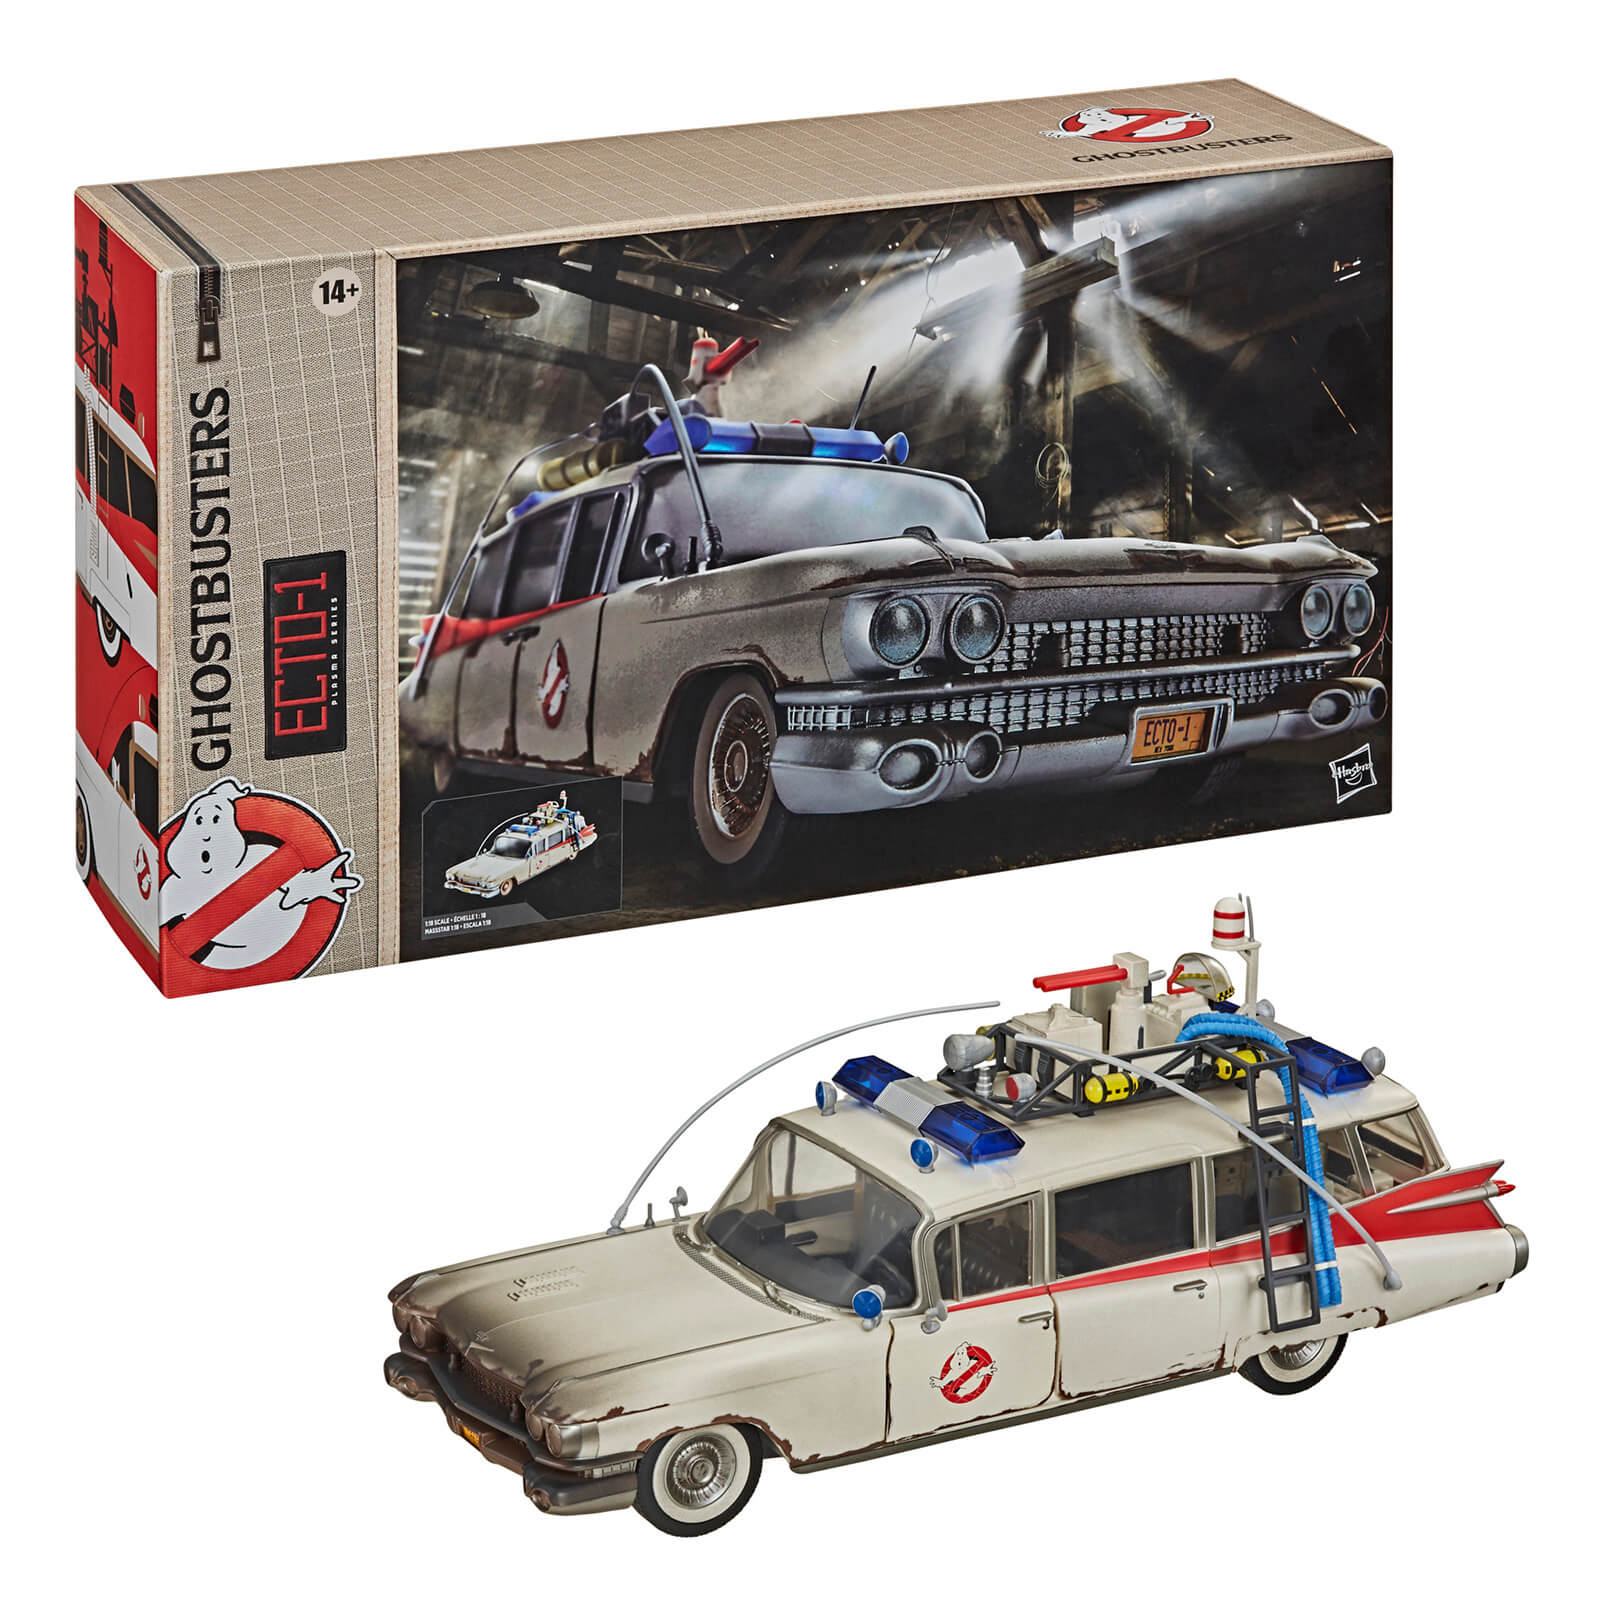 Hasbro Ghostbusters Plasma Series Ecto-1 Toy 6-Inch Ghostbusters Collectible Vehicle